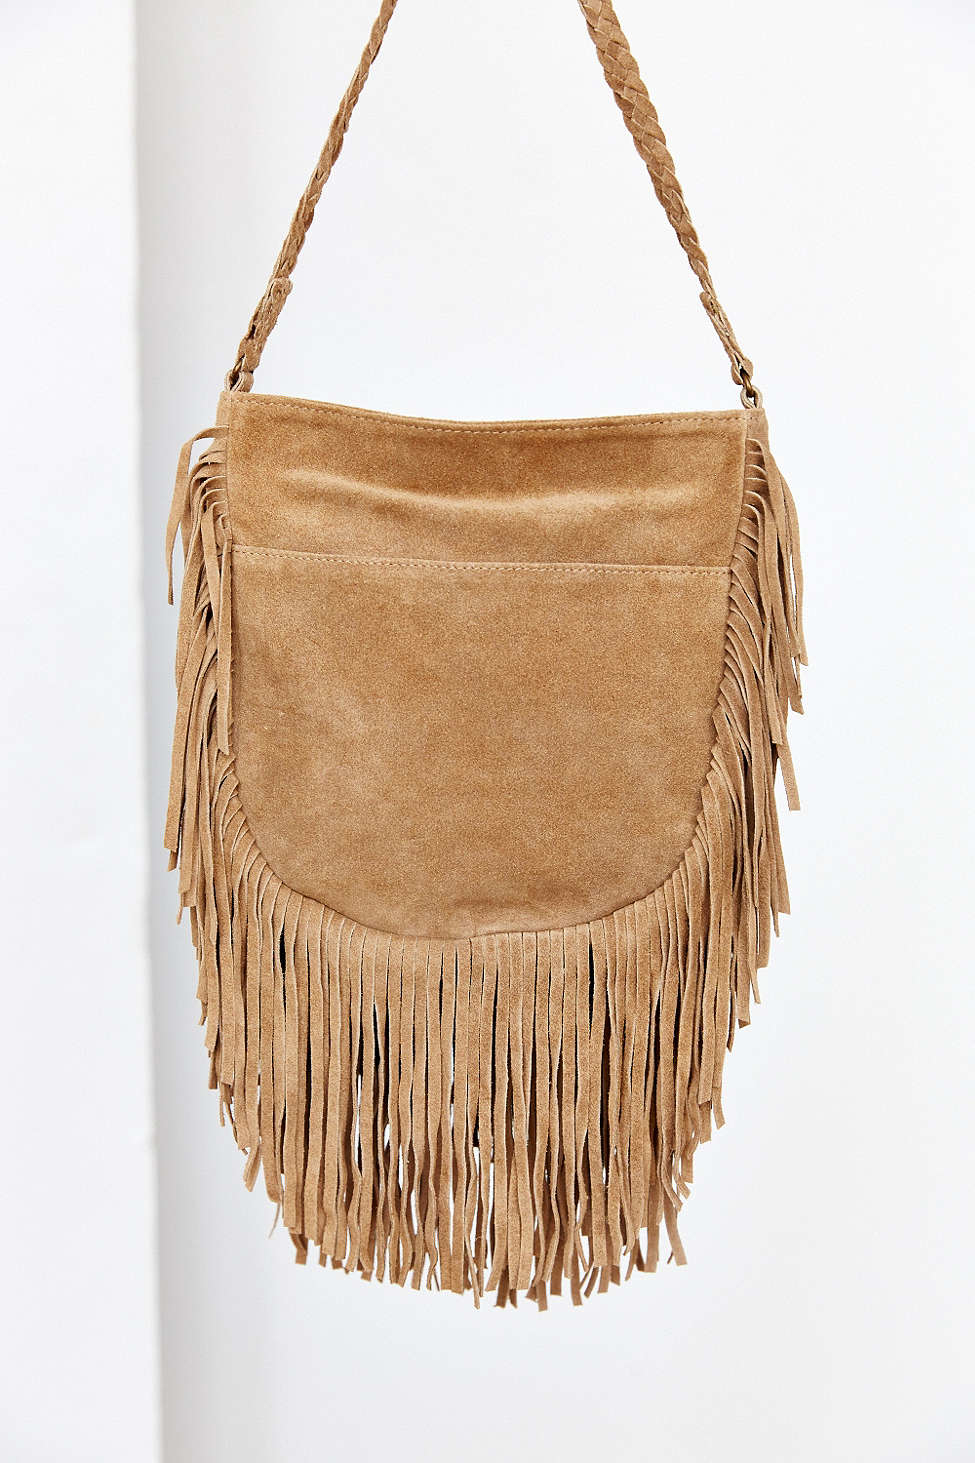 Lyst - Ecote Suede Layered Fringe Crossbody Bag in Brown